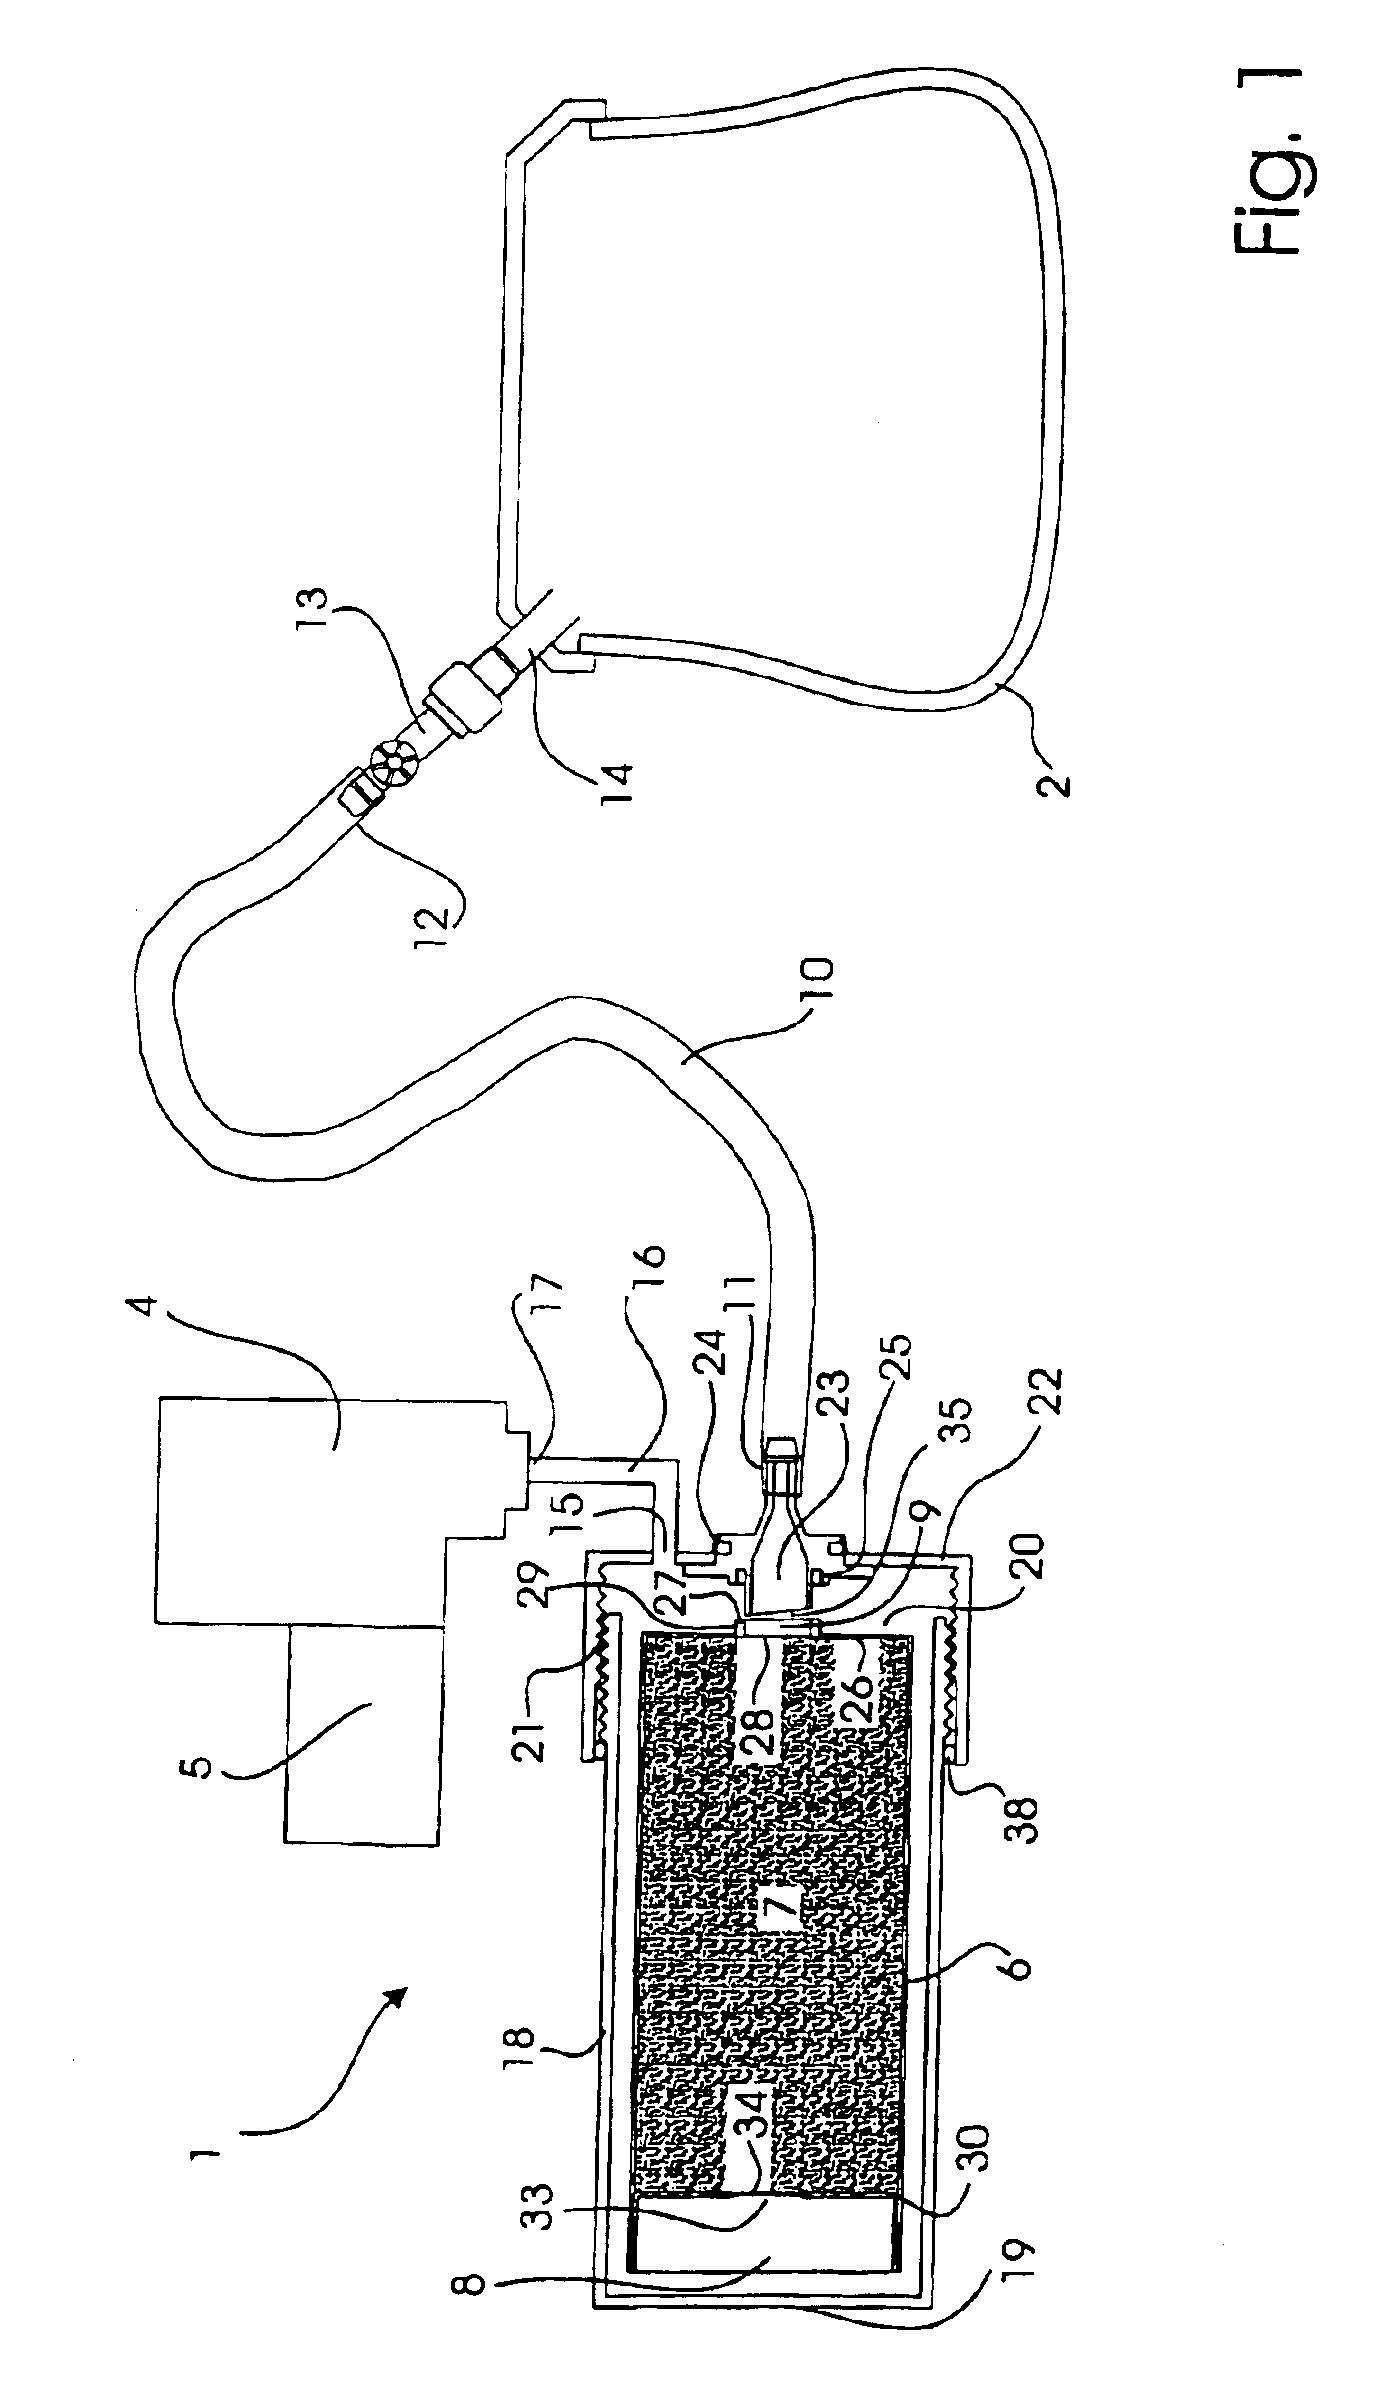 Device for sealing and inflating an inflatable object